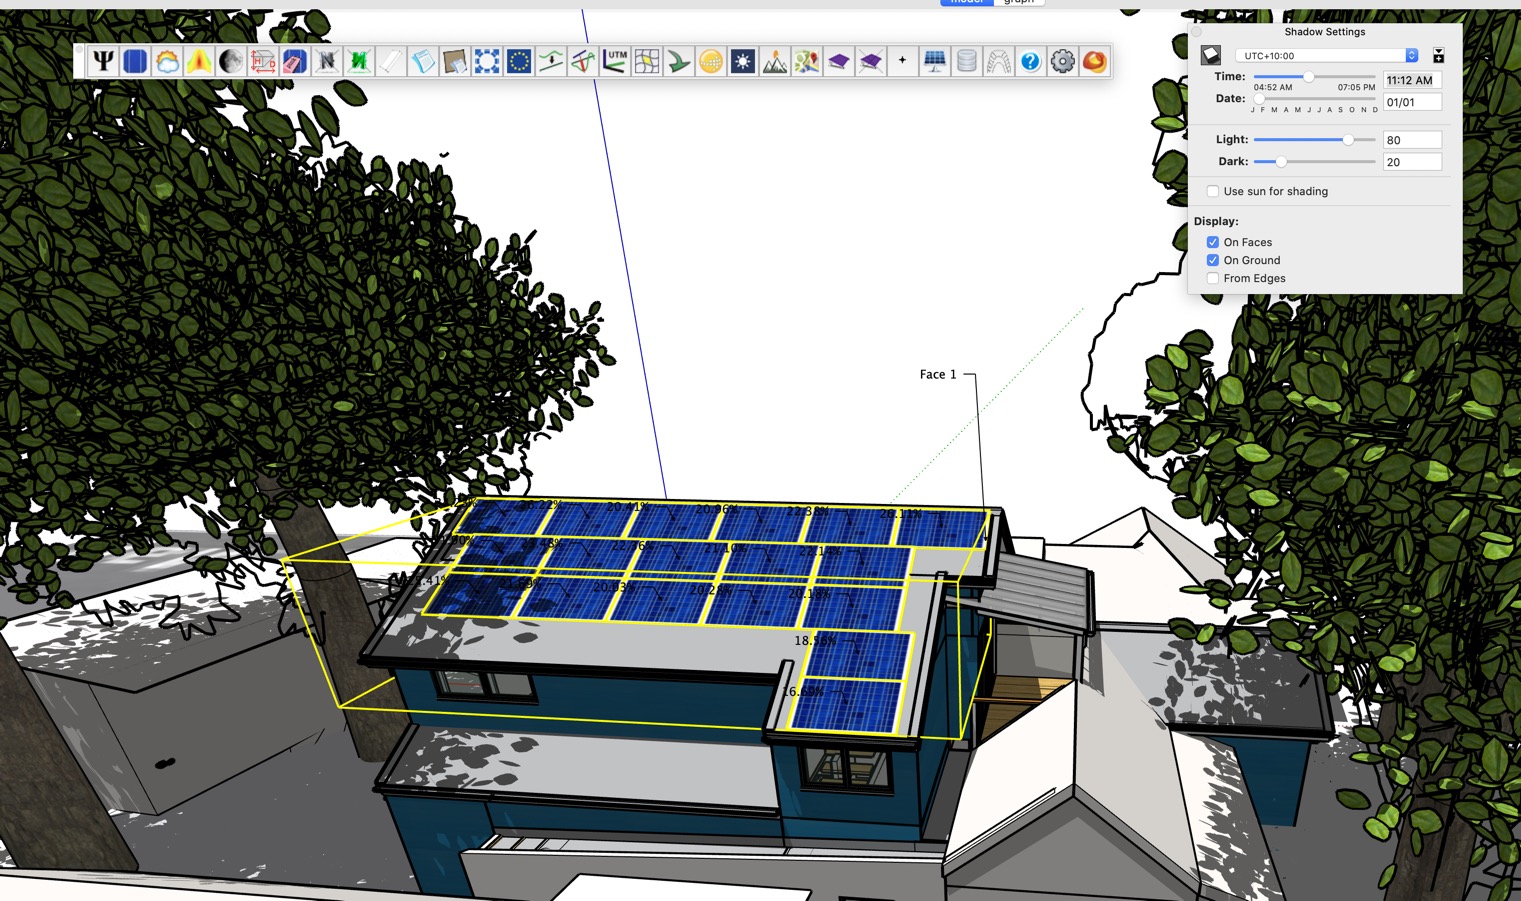 House, solar panels and trees - summer shading